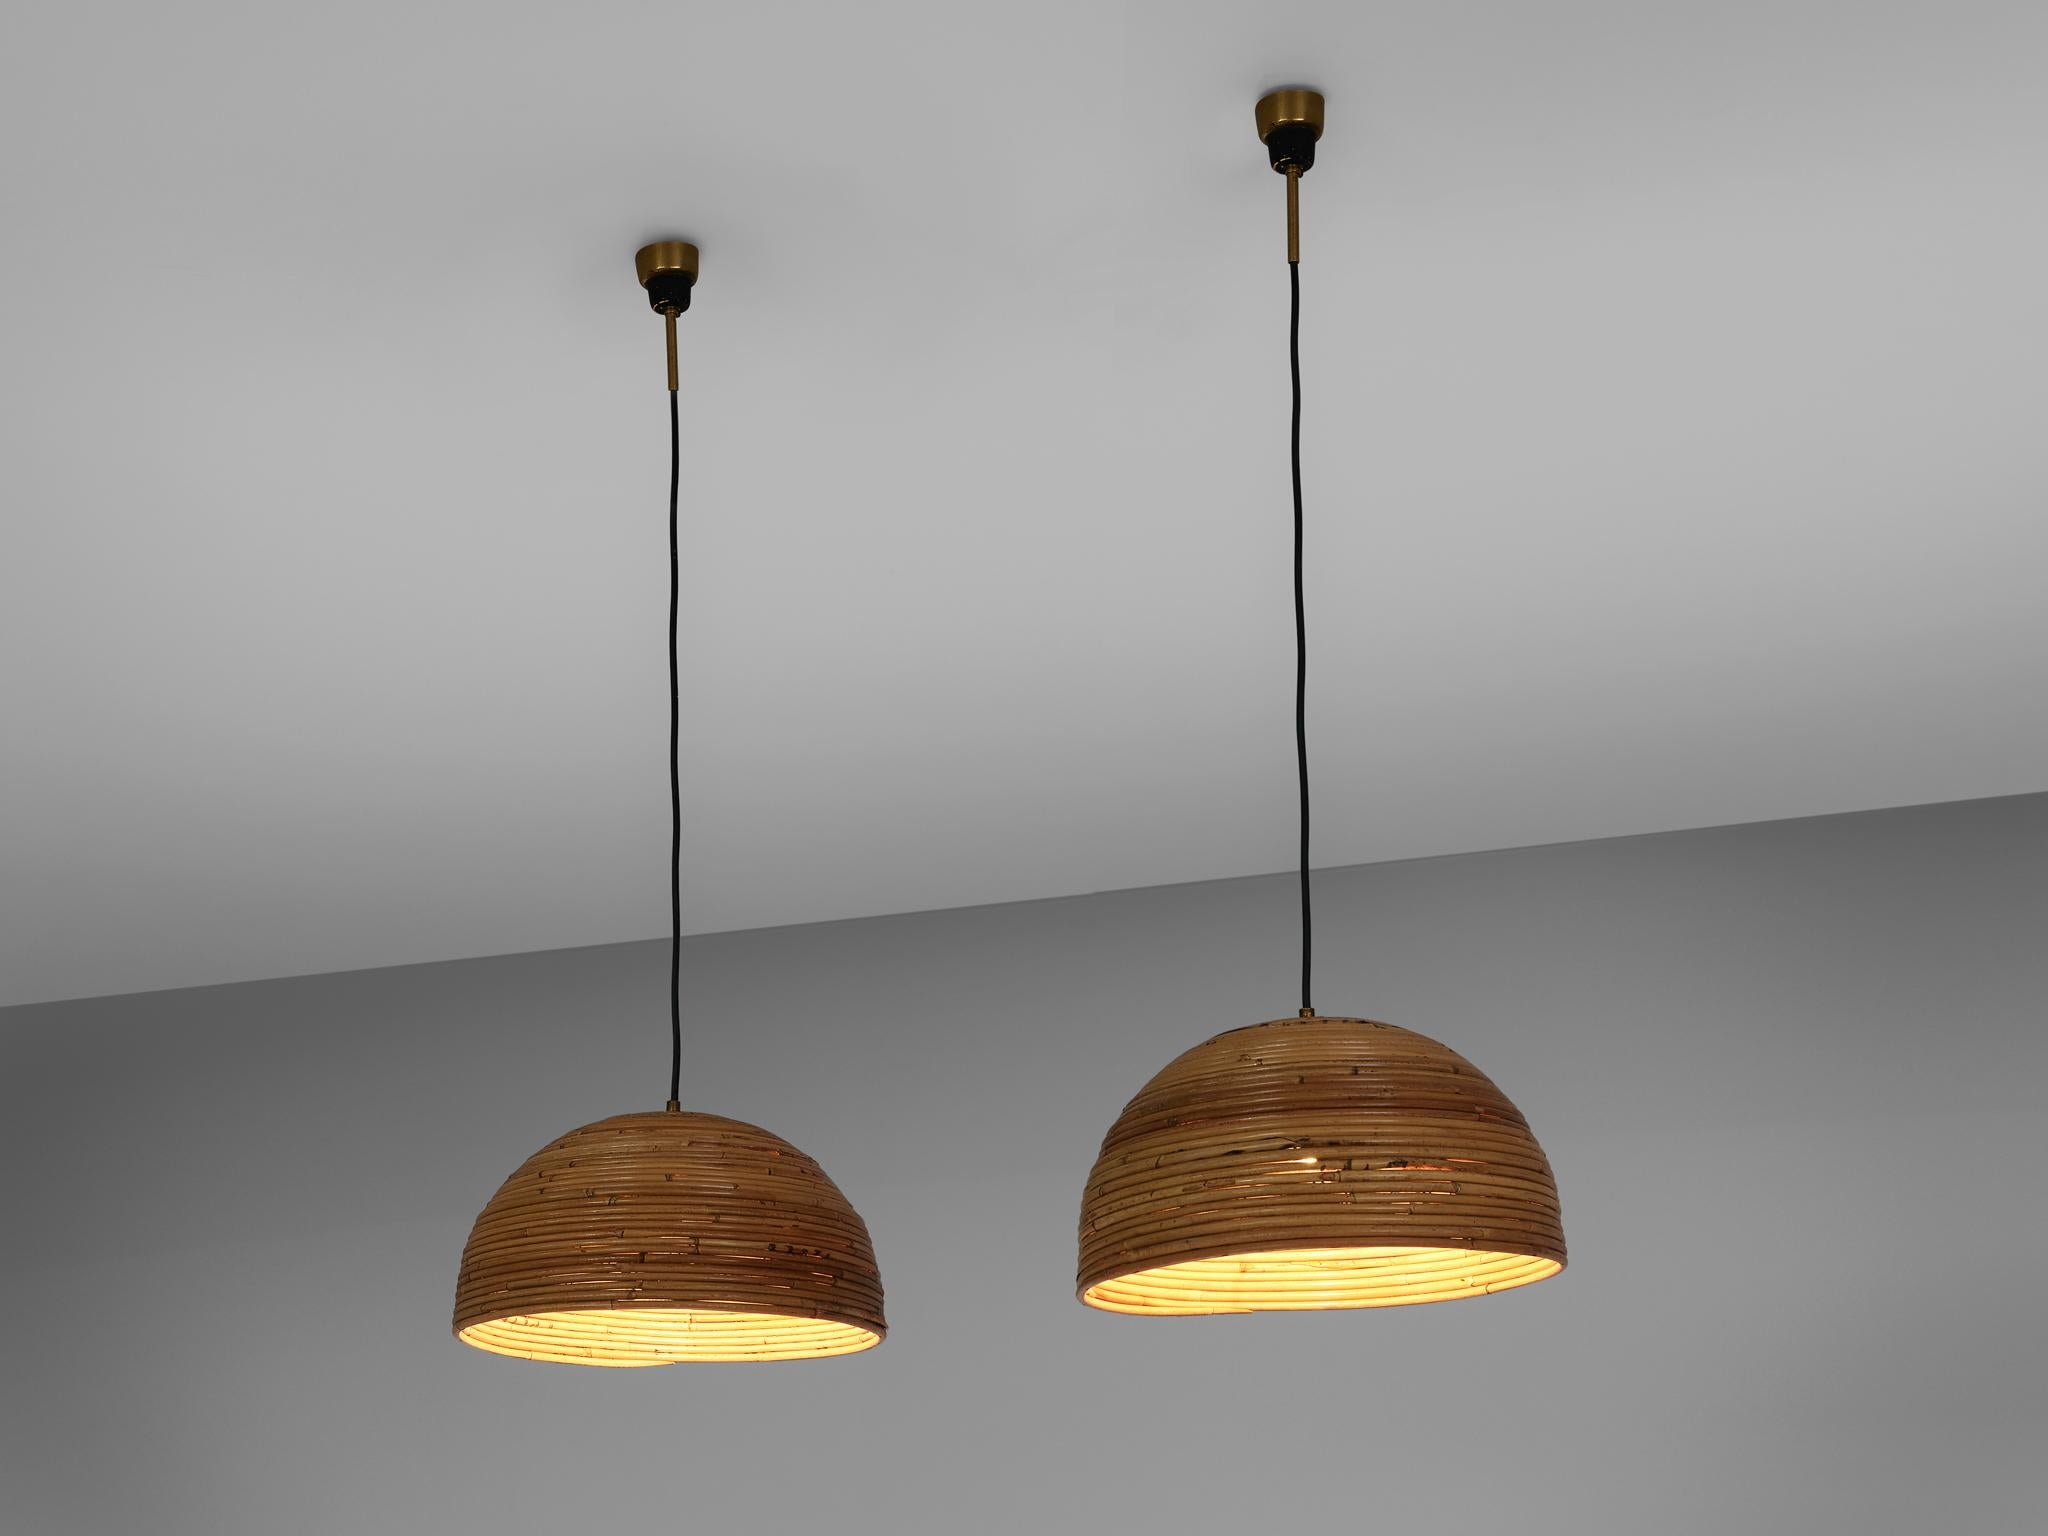 Dome pendants, bamboo bentwood, brass, Europe, 1960s

These pendants are made out of bentwood bamboo which is layered horizontally and forms a dome shape light. The warm color of the natural material presents a soft lighting indoors as well as in